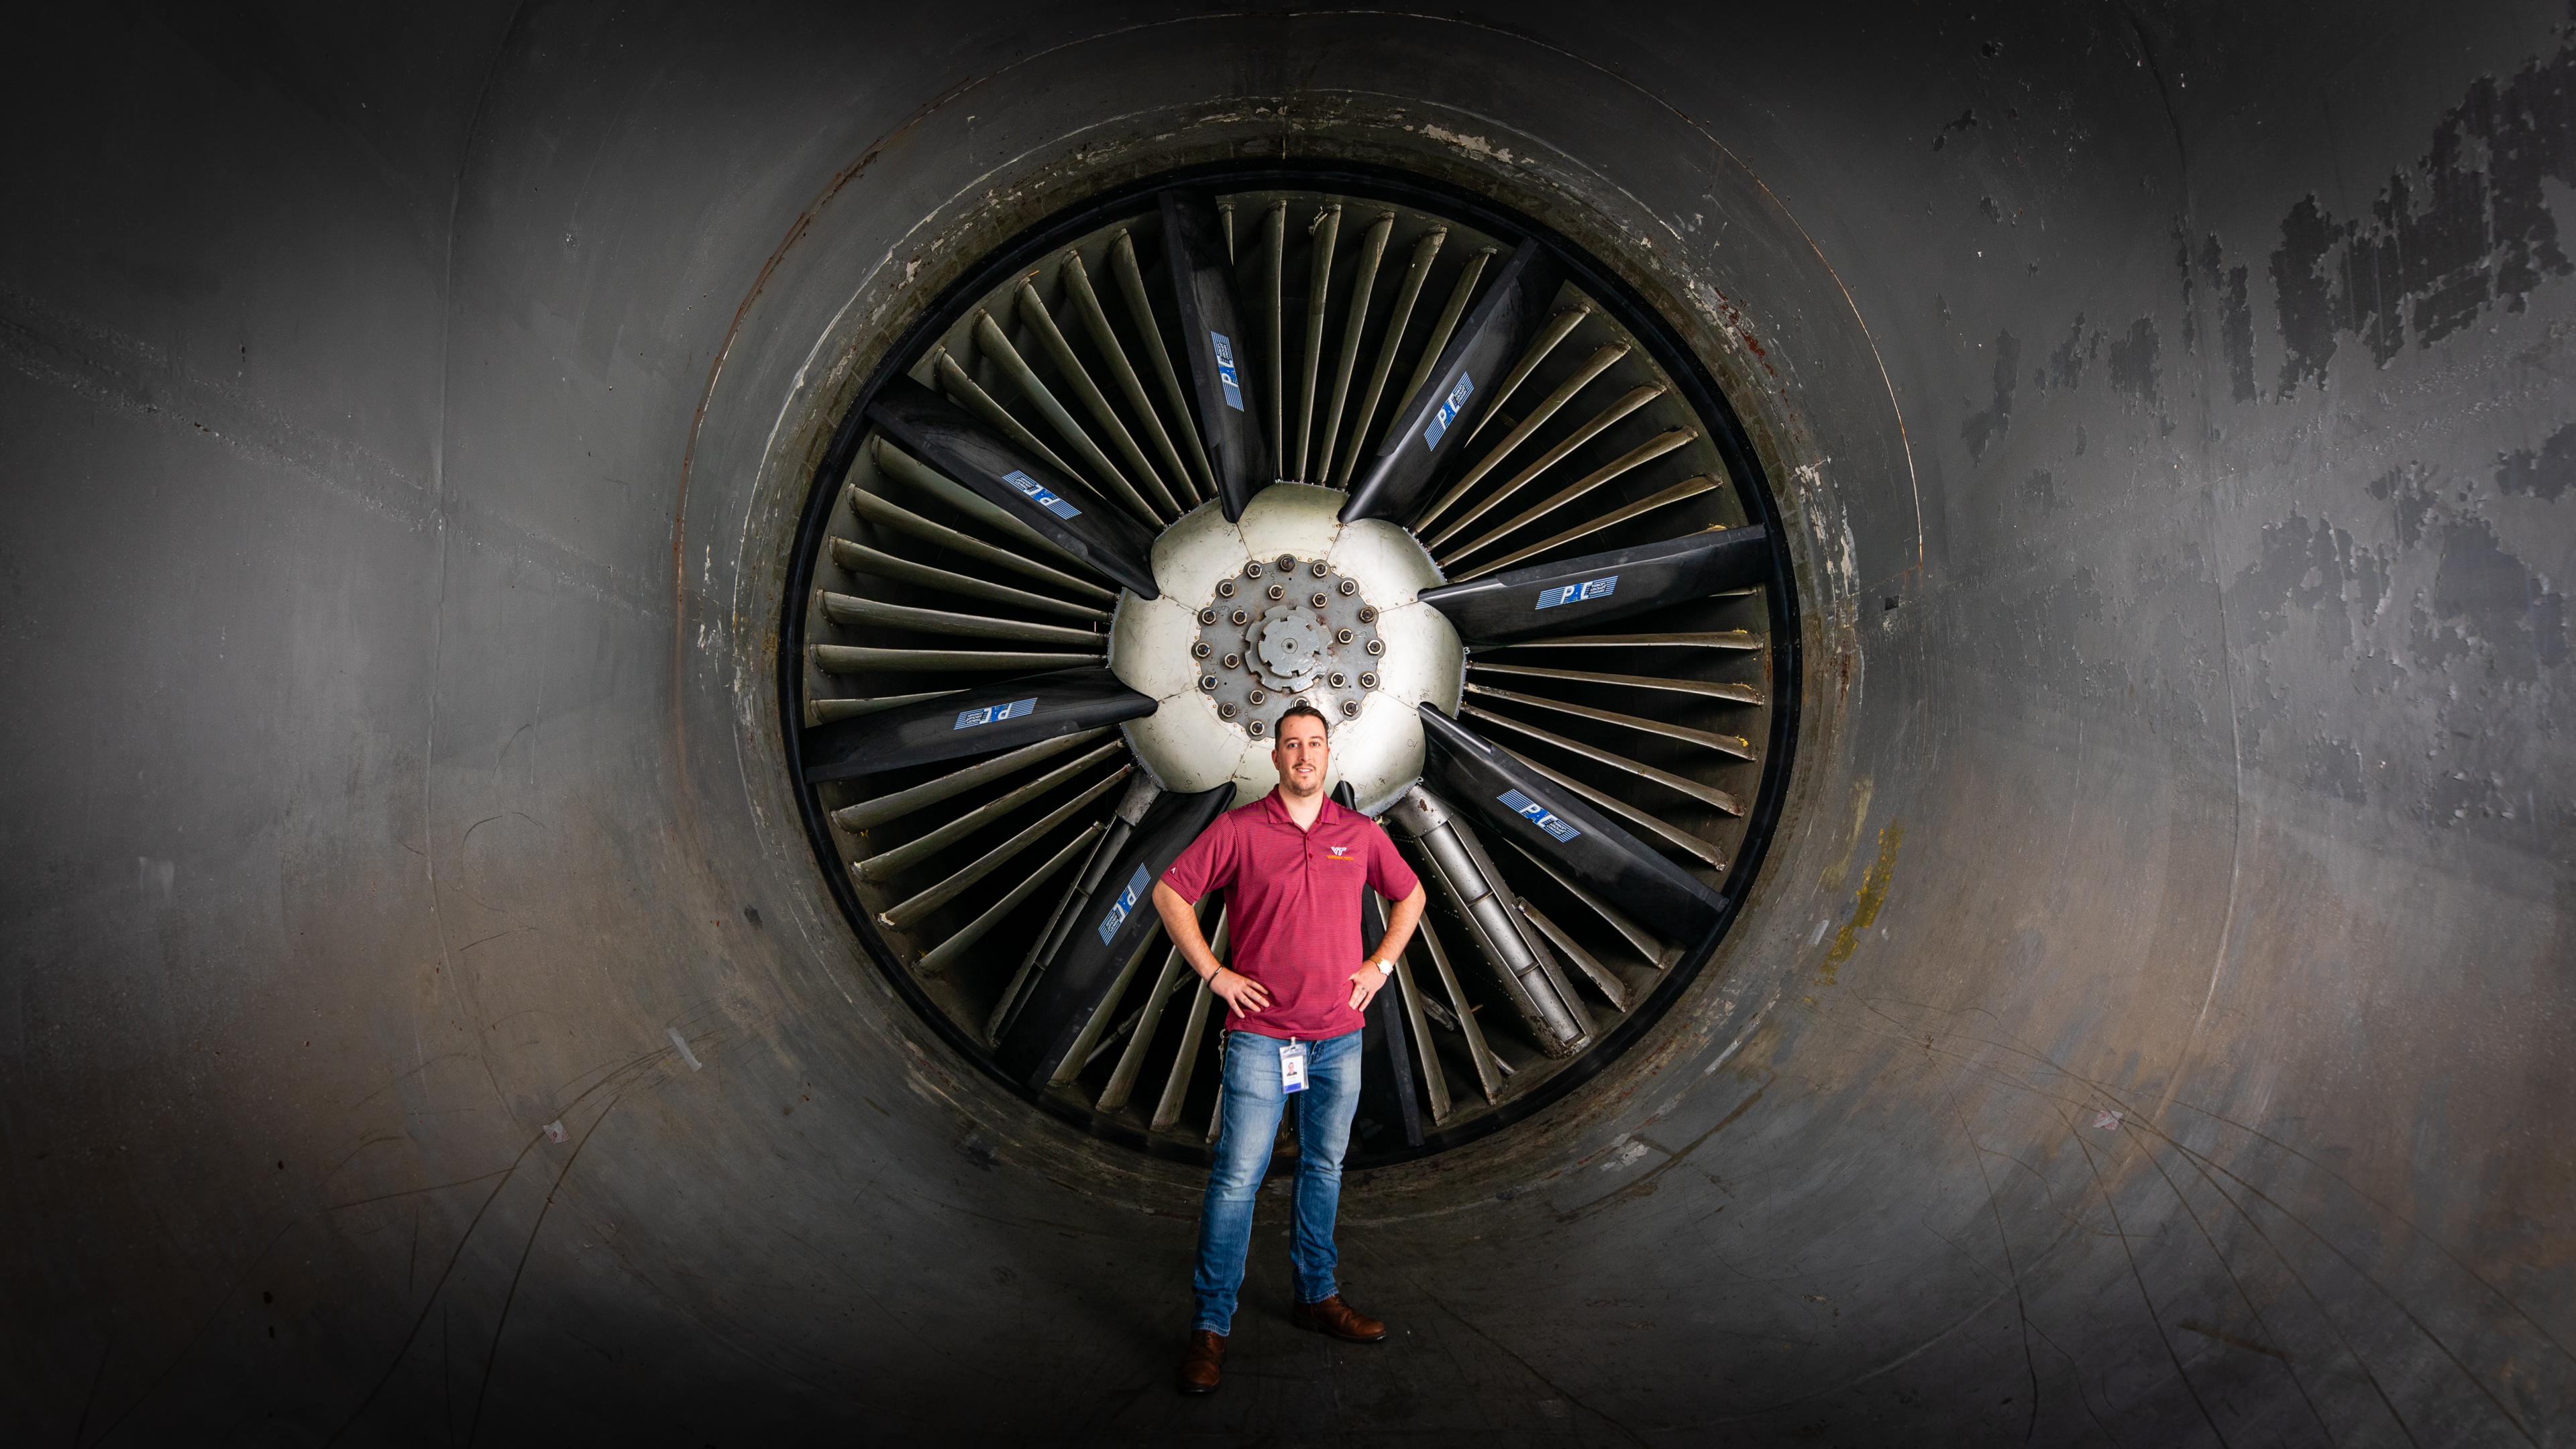 An alumni stands in front of the fan in the wind tunnel.